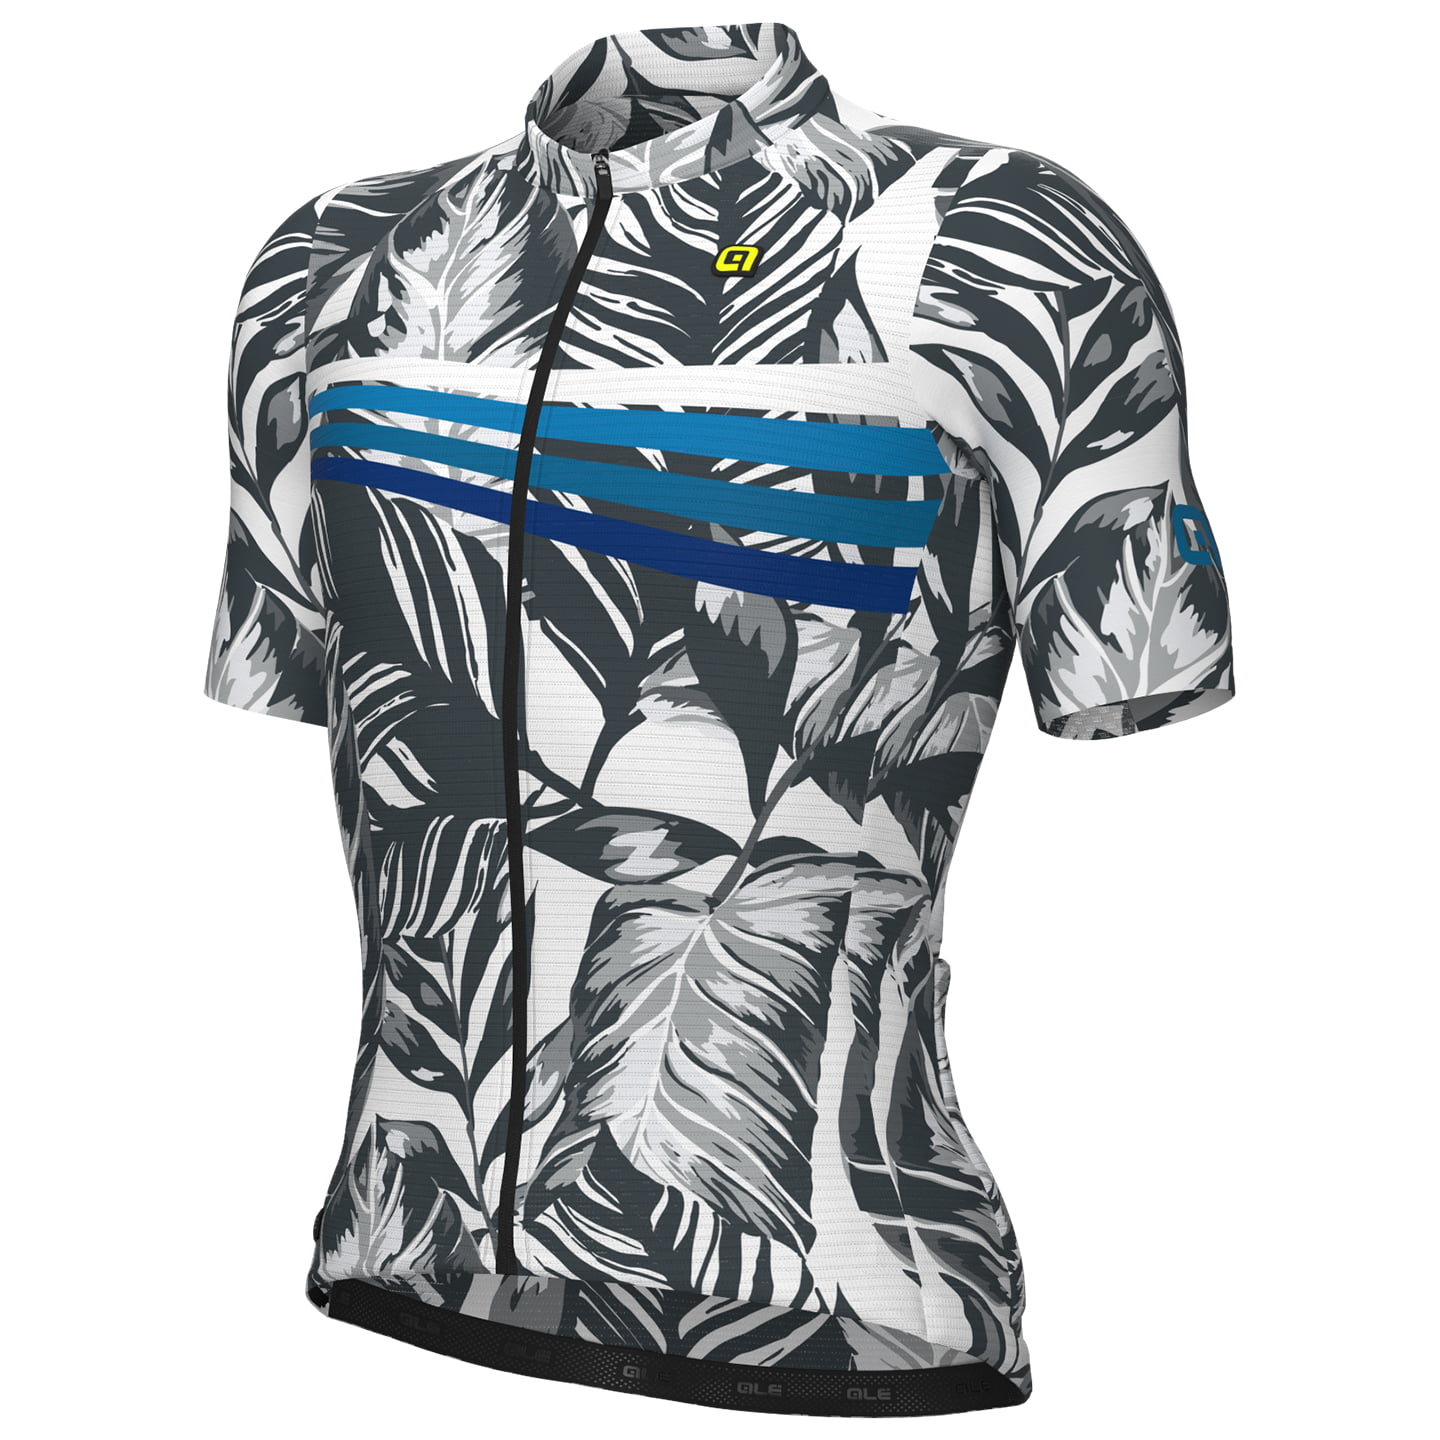 ALE Wild Short Sleeve Jersey, for men, size XL, Cycling jersey, Cycle clothing